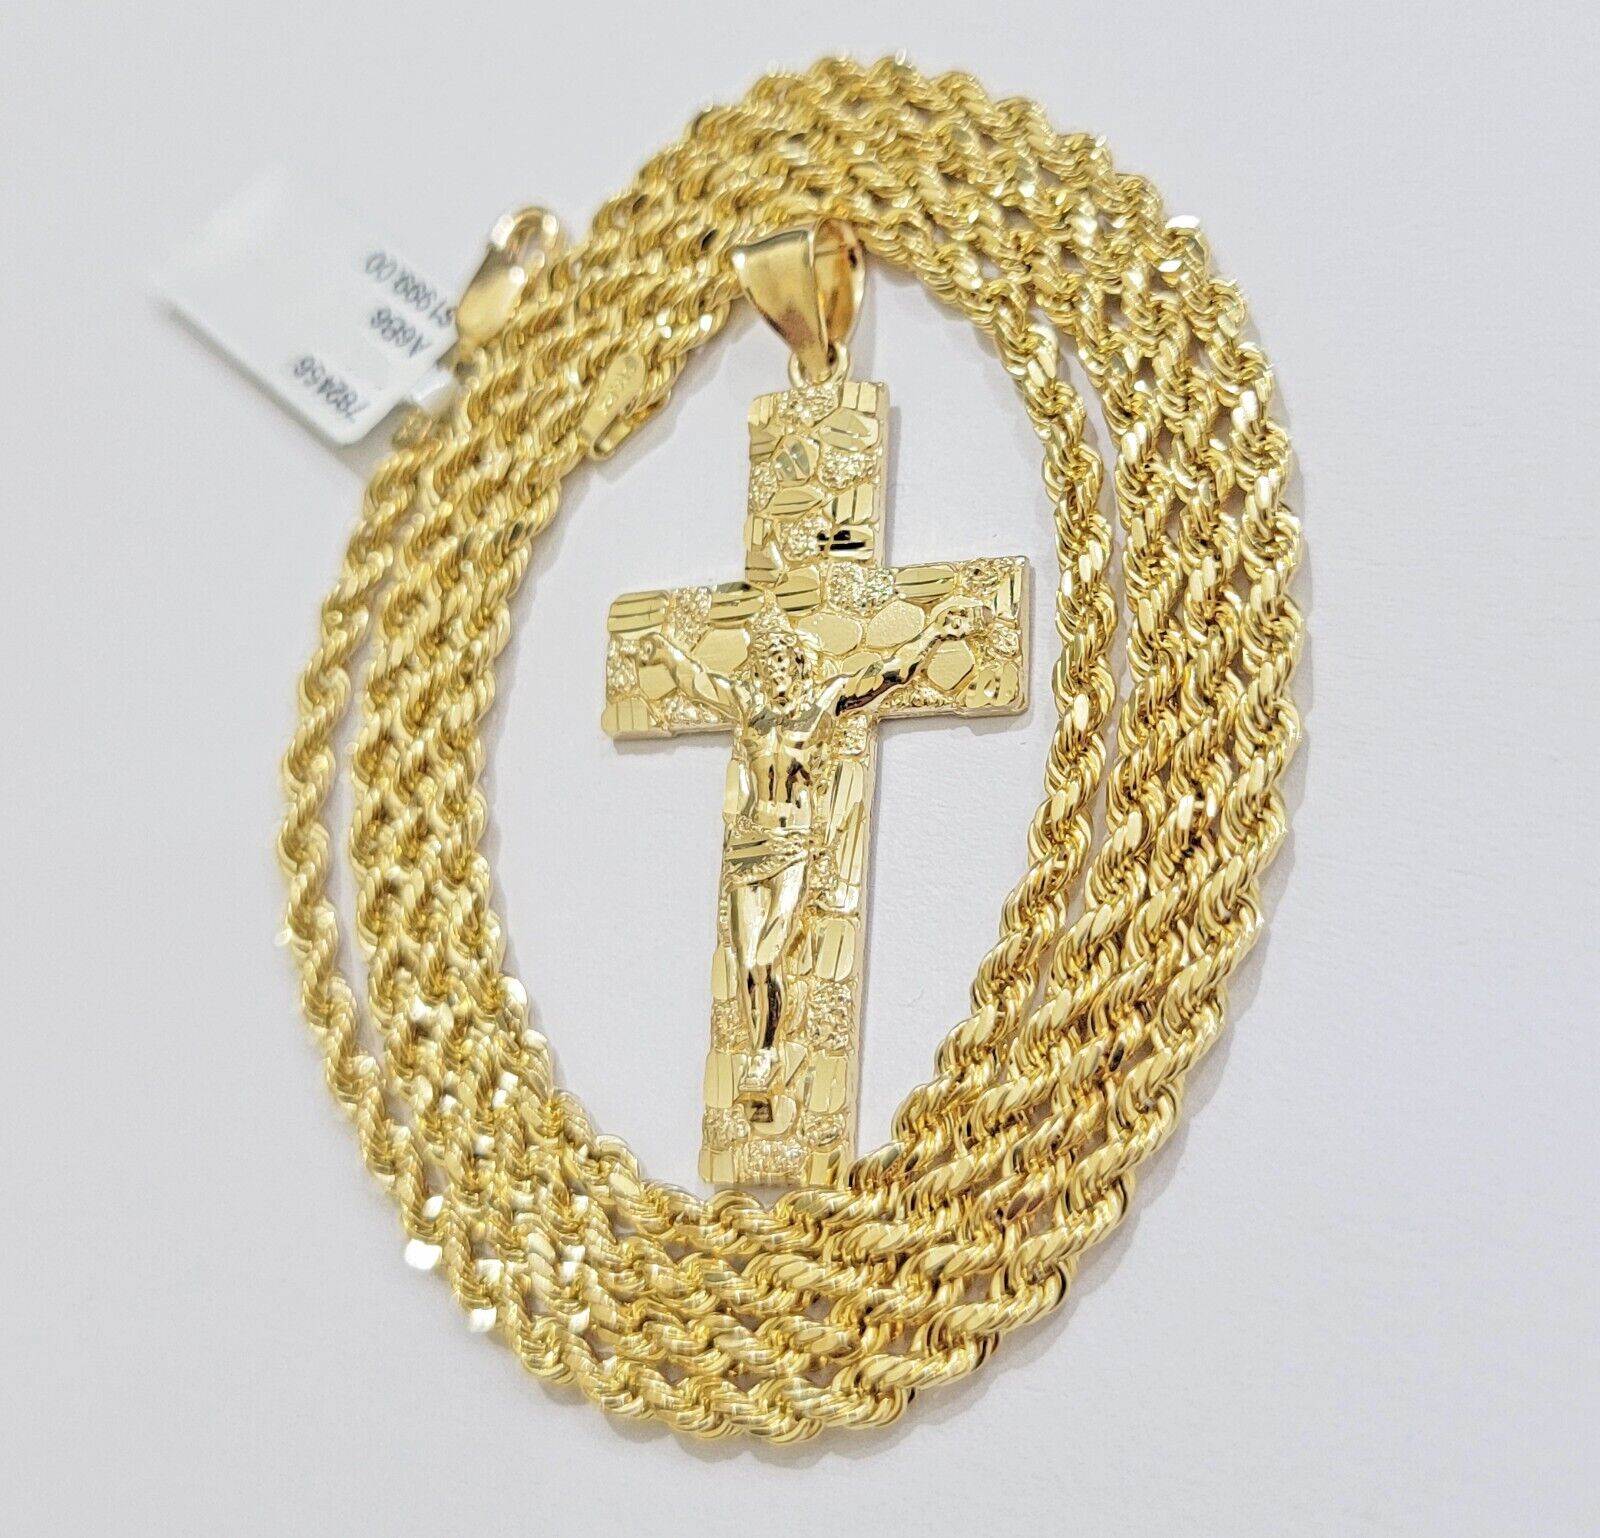 10k Yellow Gold Rope Chain Nugget Cross Charm Set 28 Inch necklace pendant, REAL